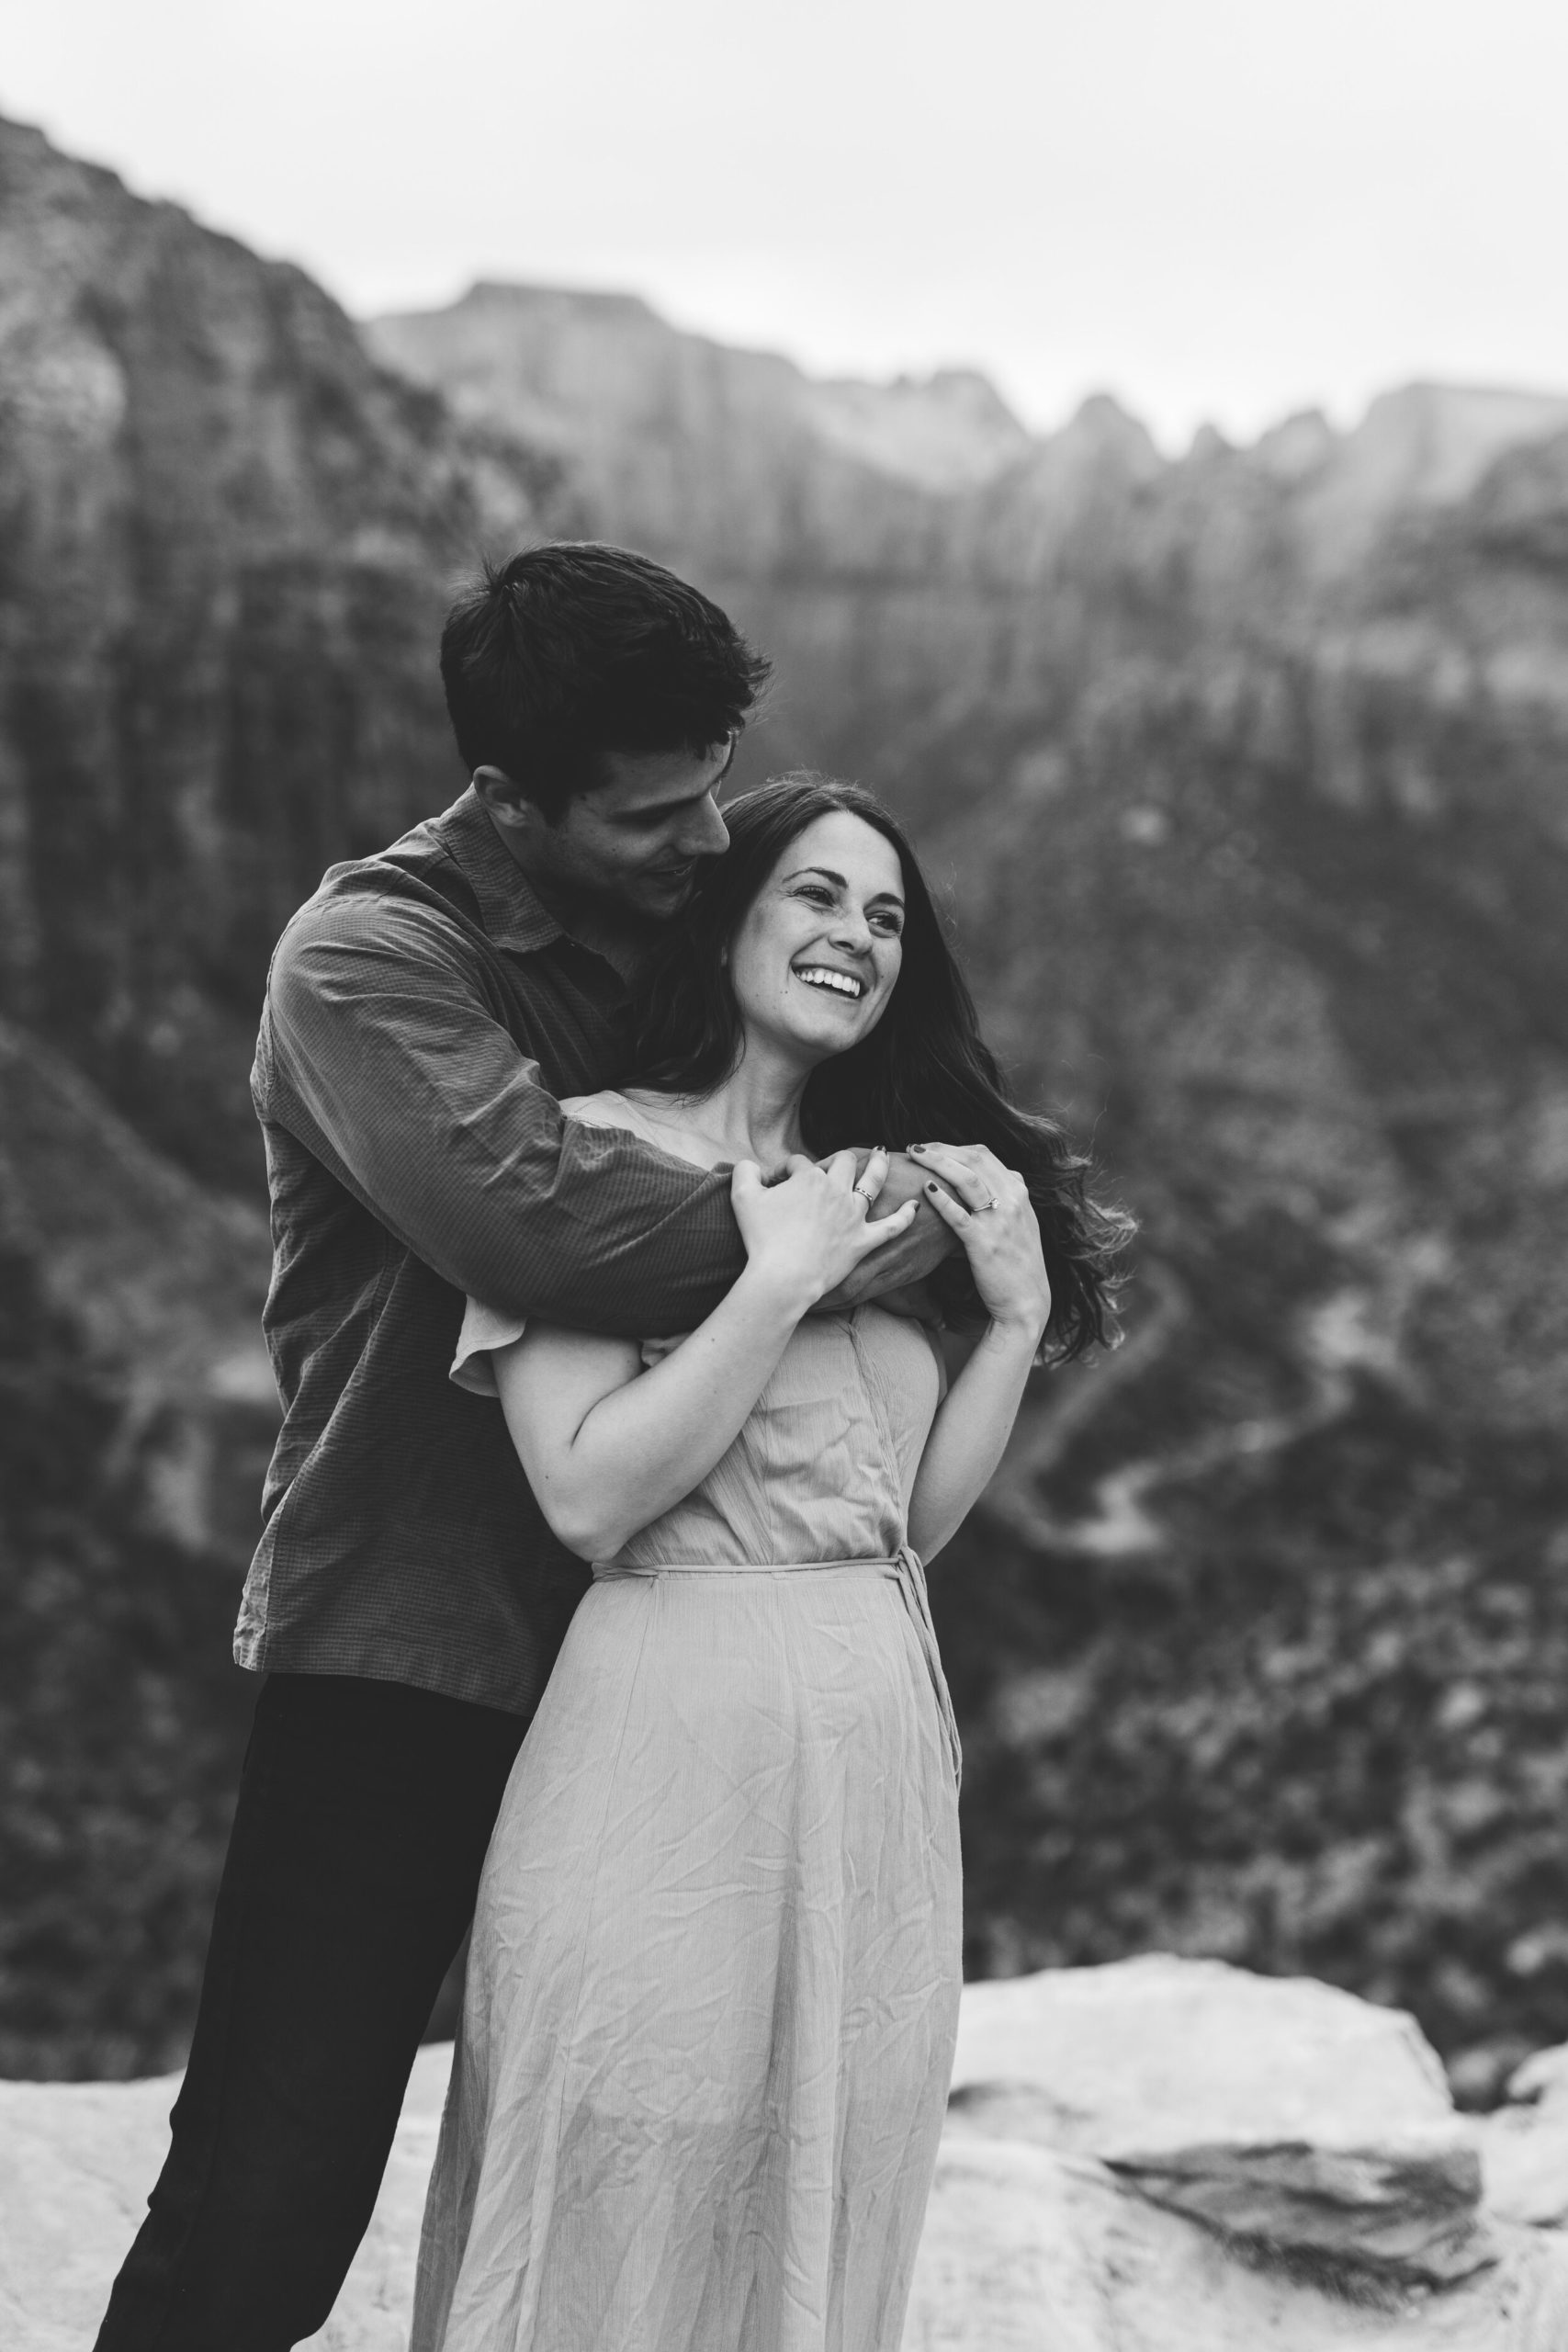 Kylee + Andrew - Zion National Park, Utah Canyon Overlook Adventure Session6.jpg